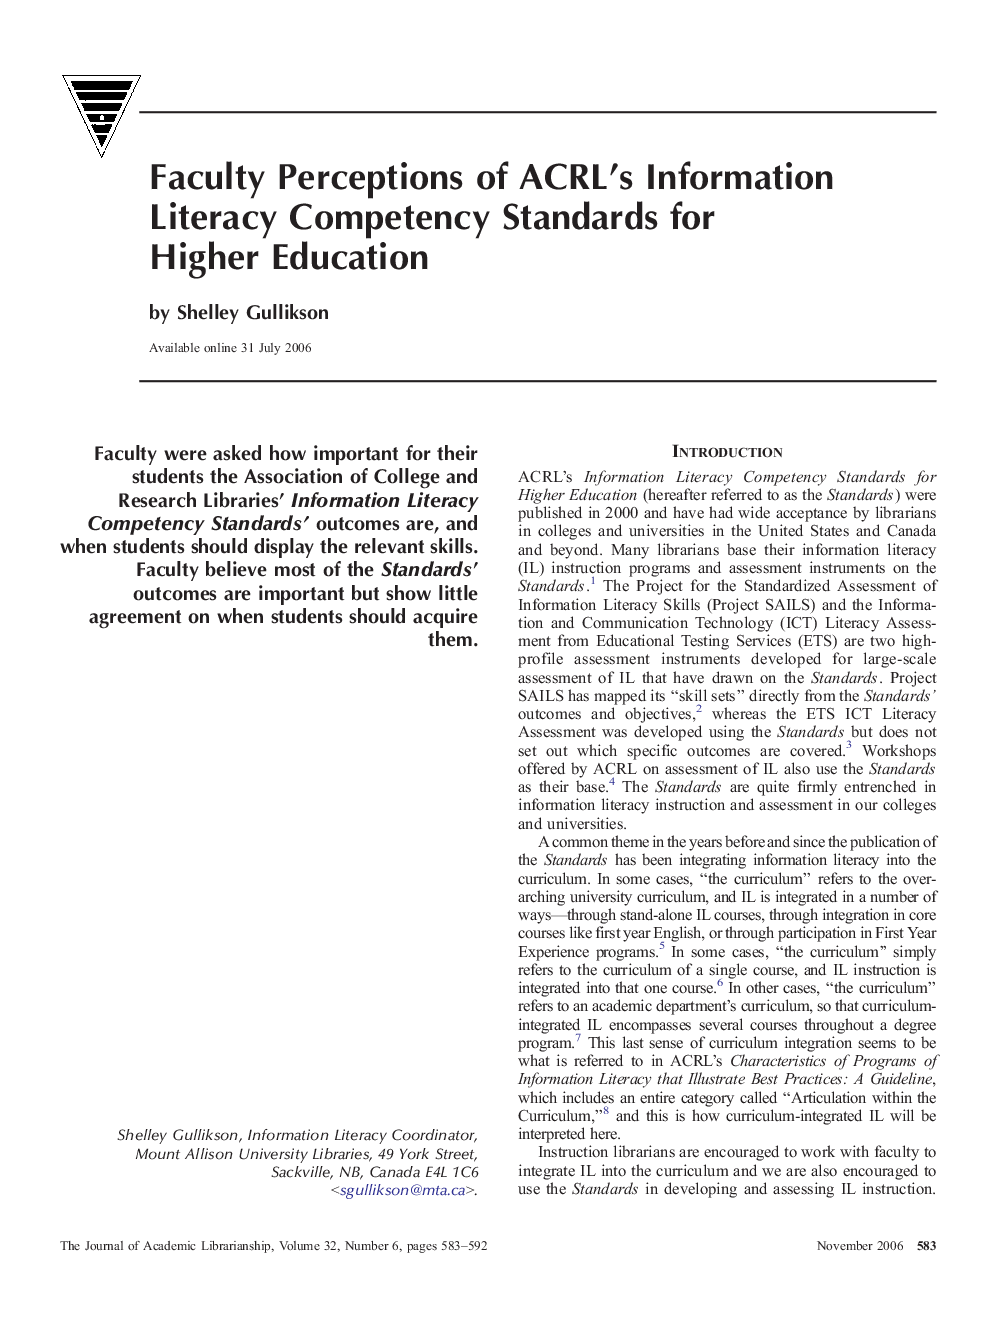 Faculty Perceptions of ACRL's Information Literacy Competency Standards for Higher Education